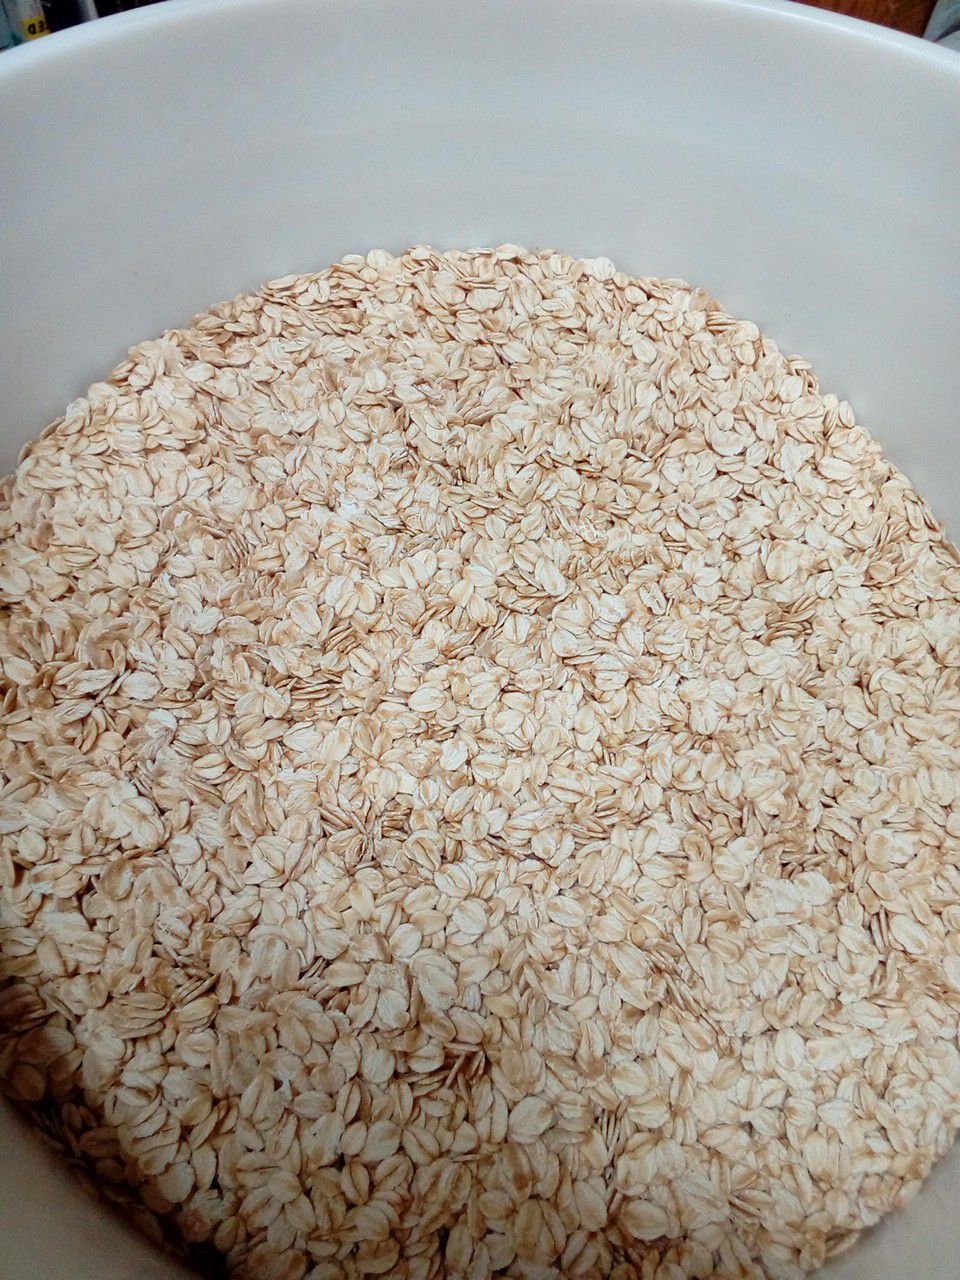 15lbs Gluten free thick rolled oats, 5 gallon bucket